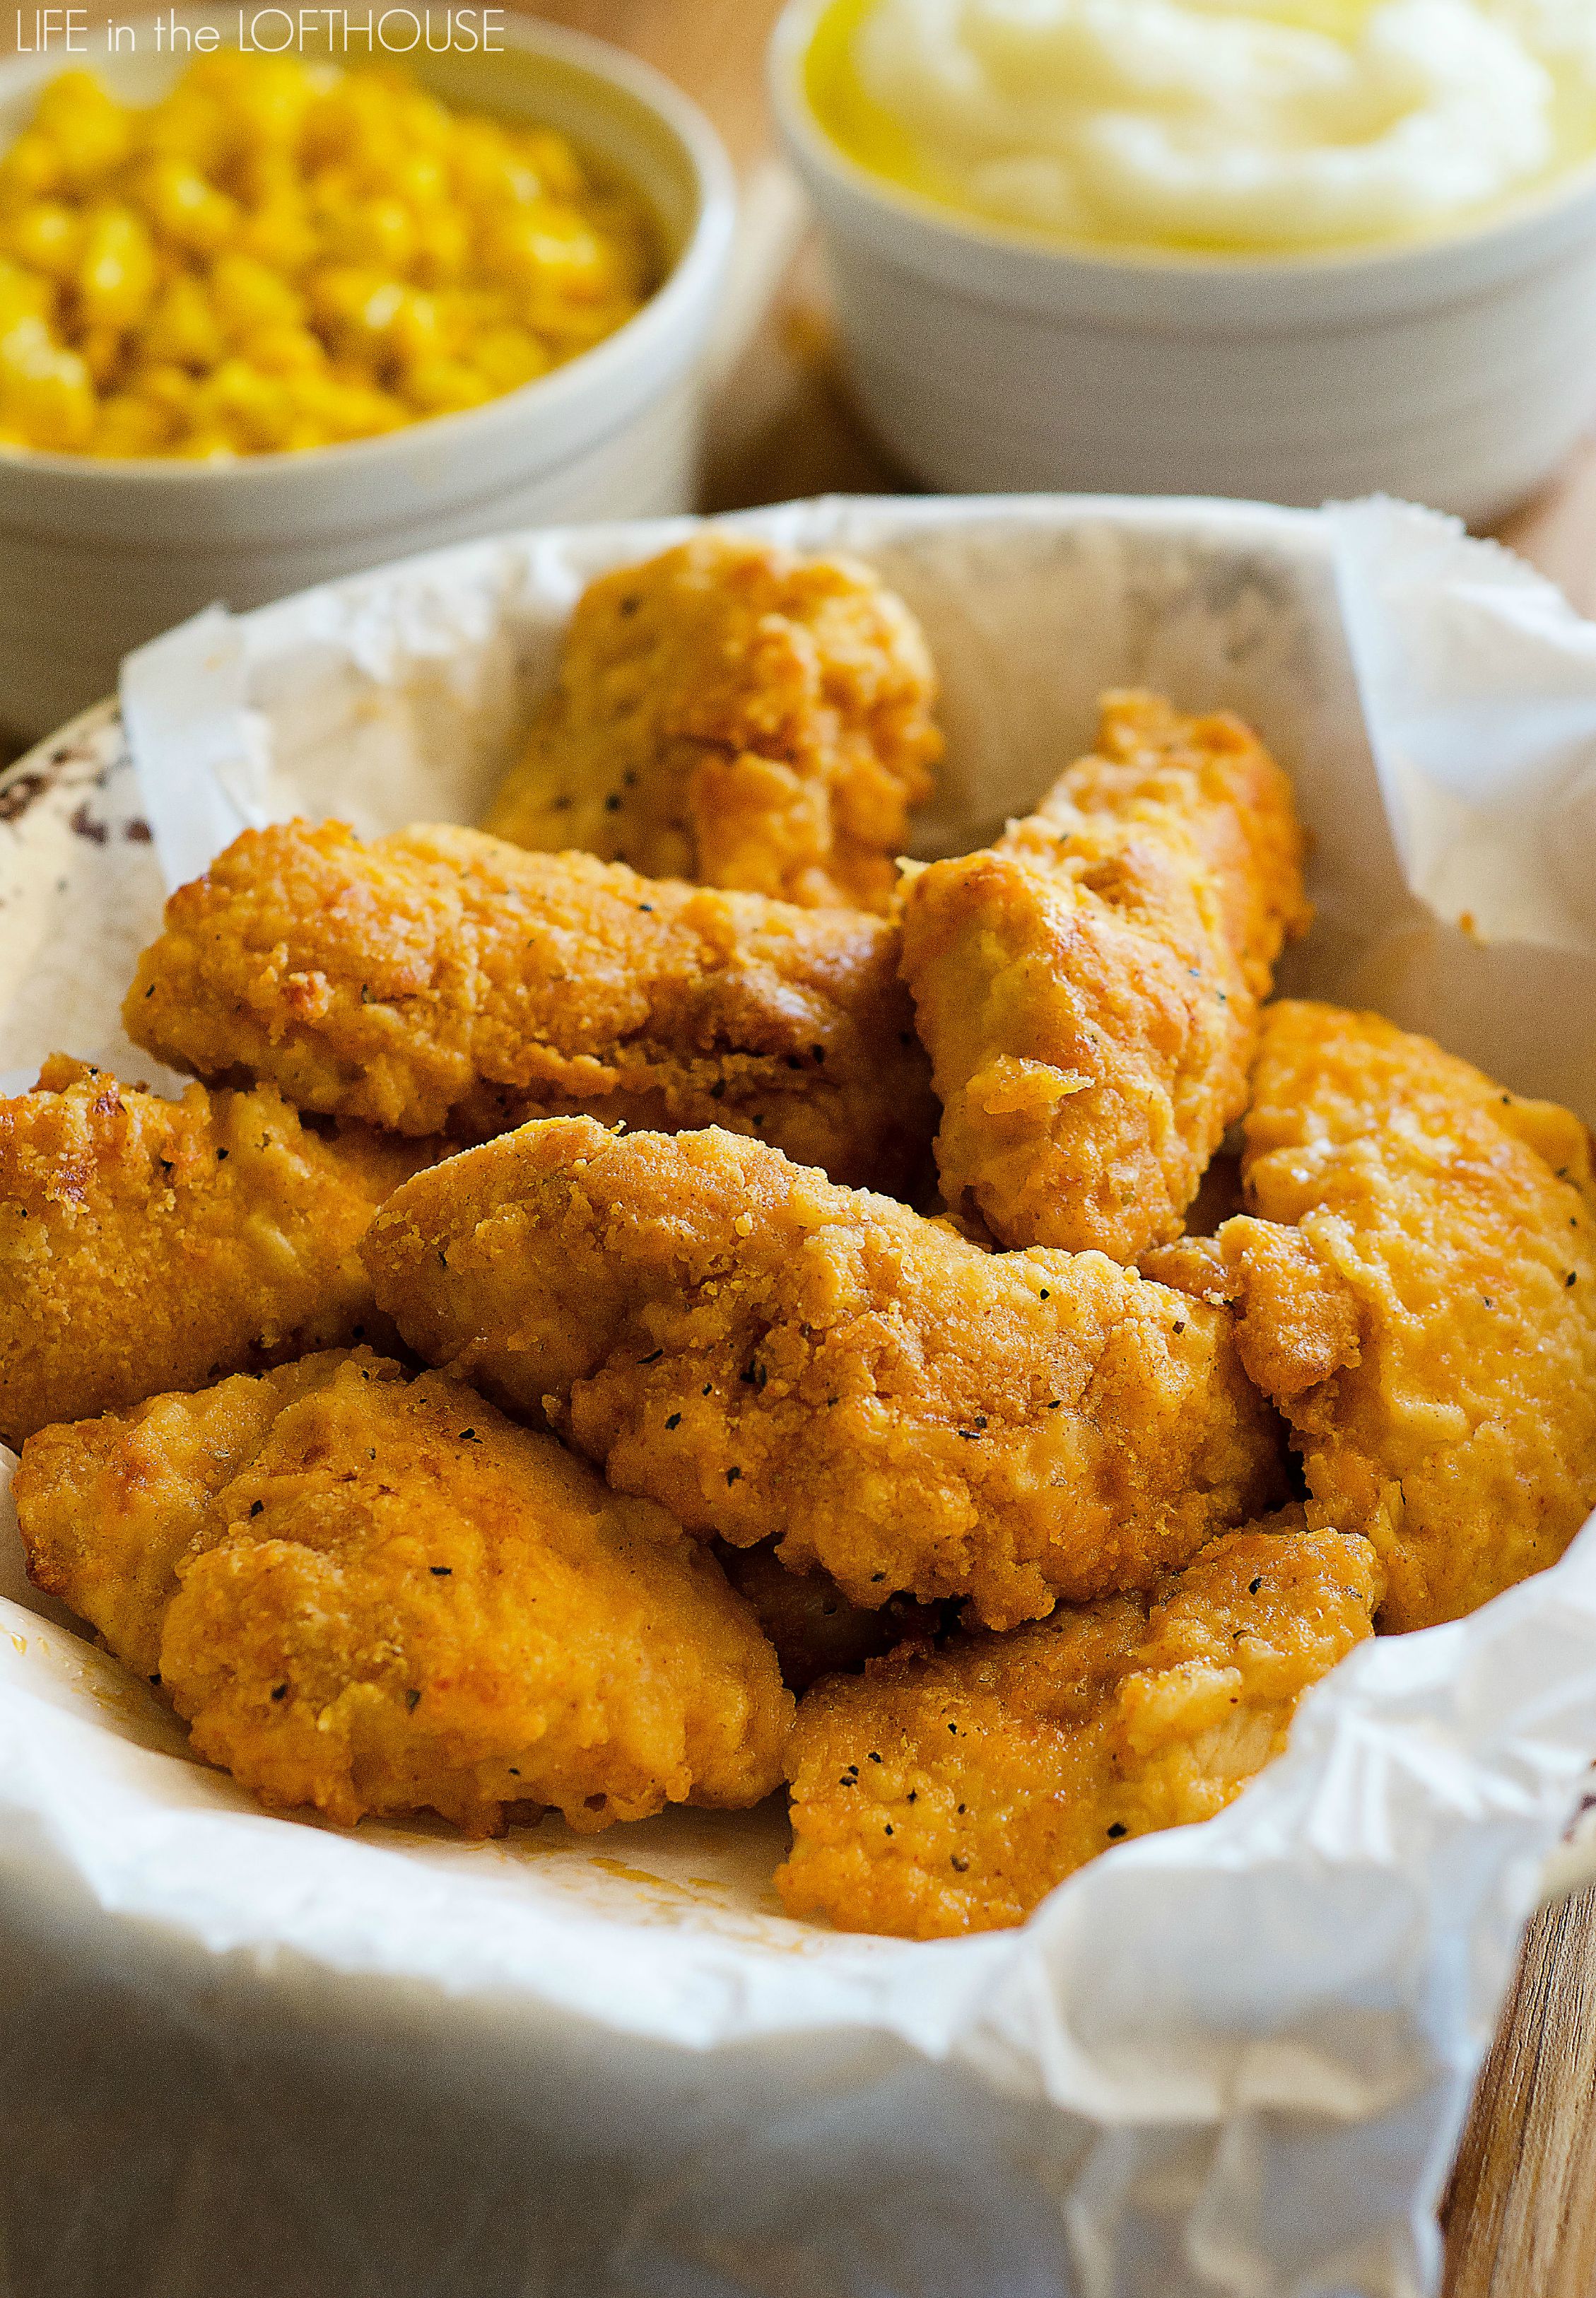 https://life-in-the-lofthouse.com/wp-content/uploads/2015/09/Oven-Fried_Chicken2.jpg